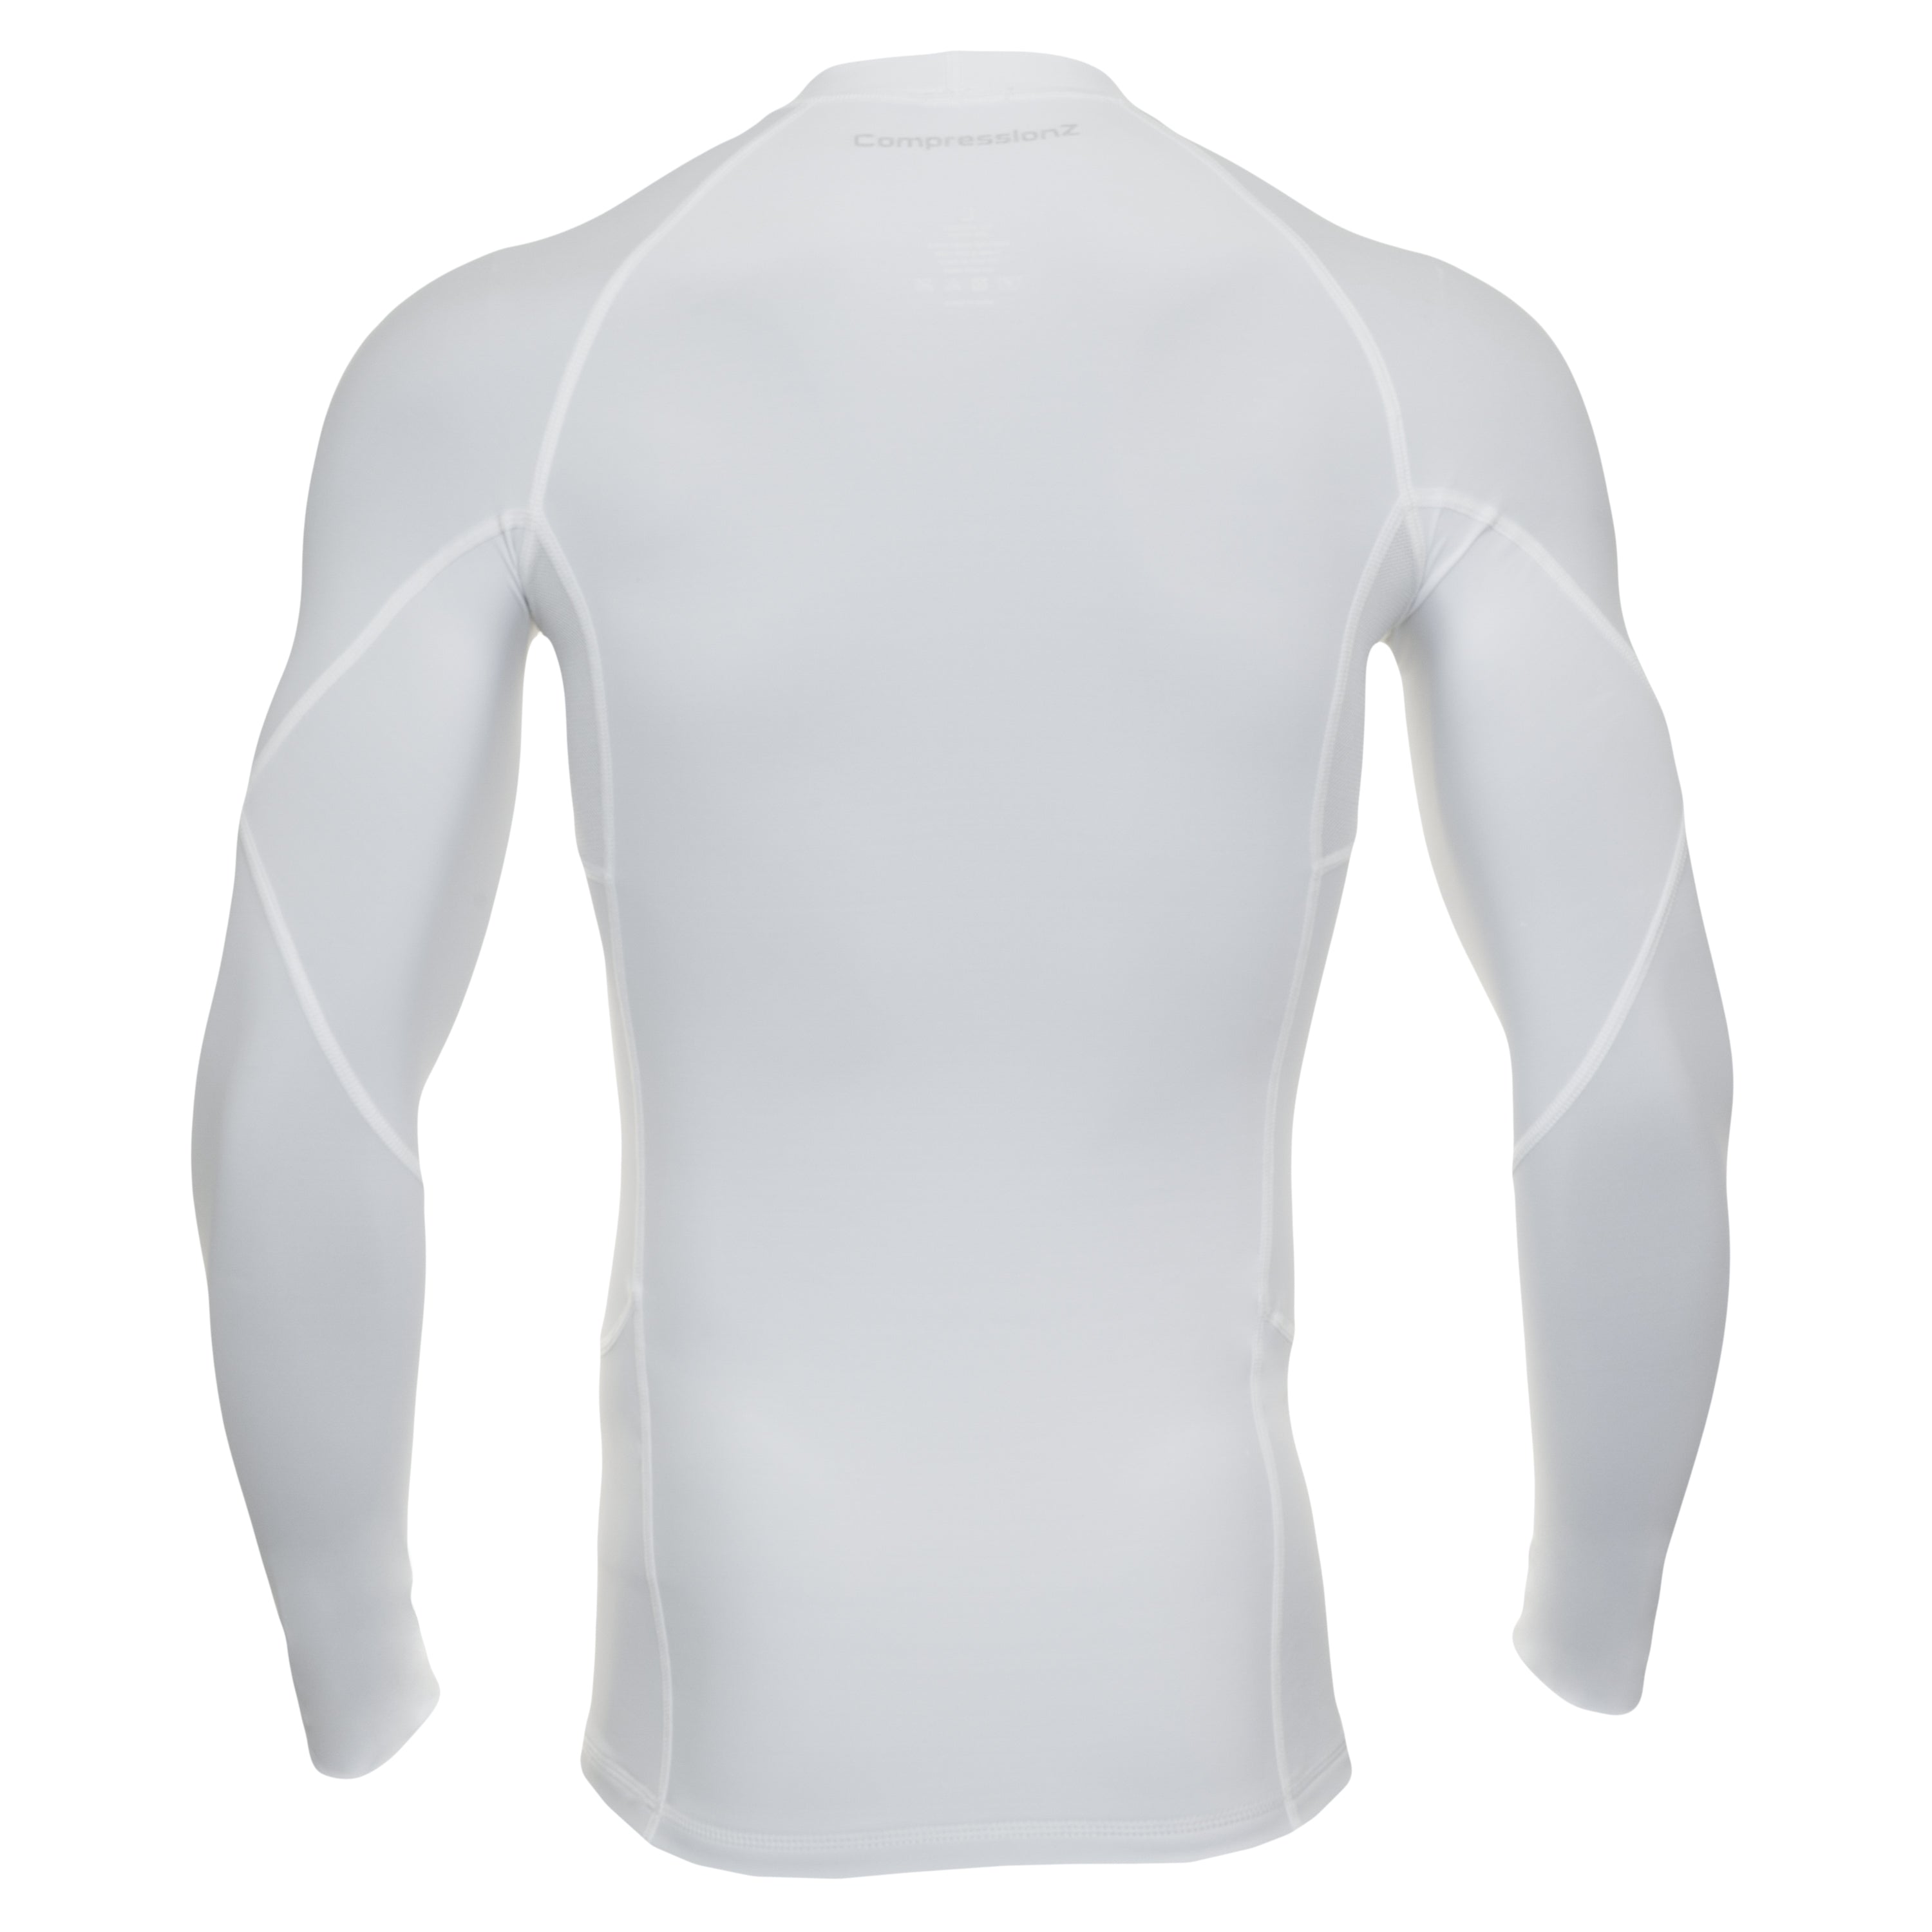 Men's Compression Long Sleeve Shirt - White – CompressionZ